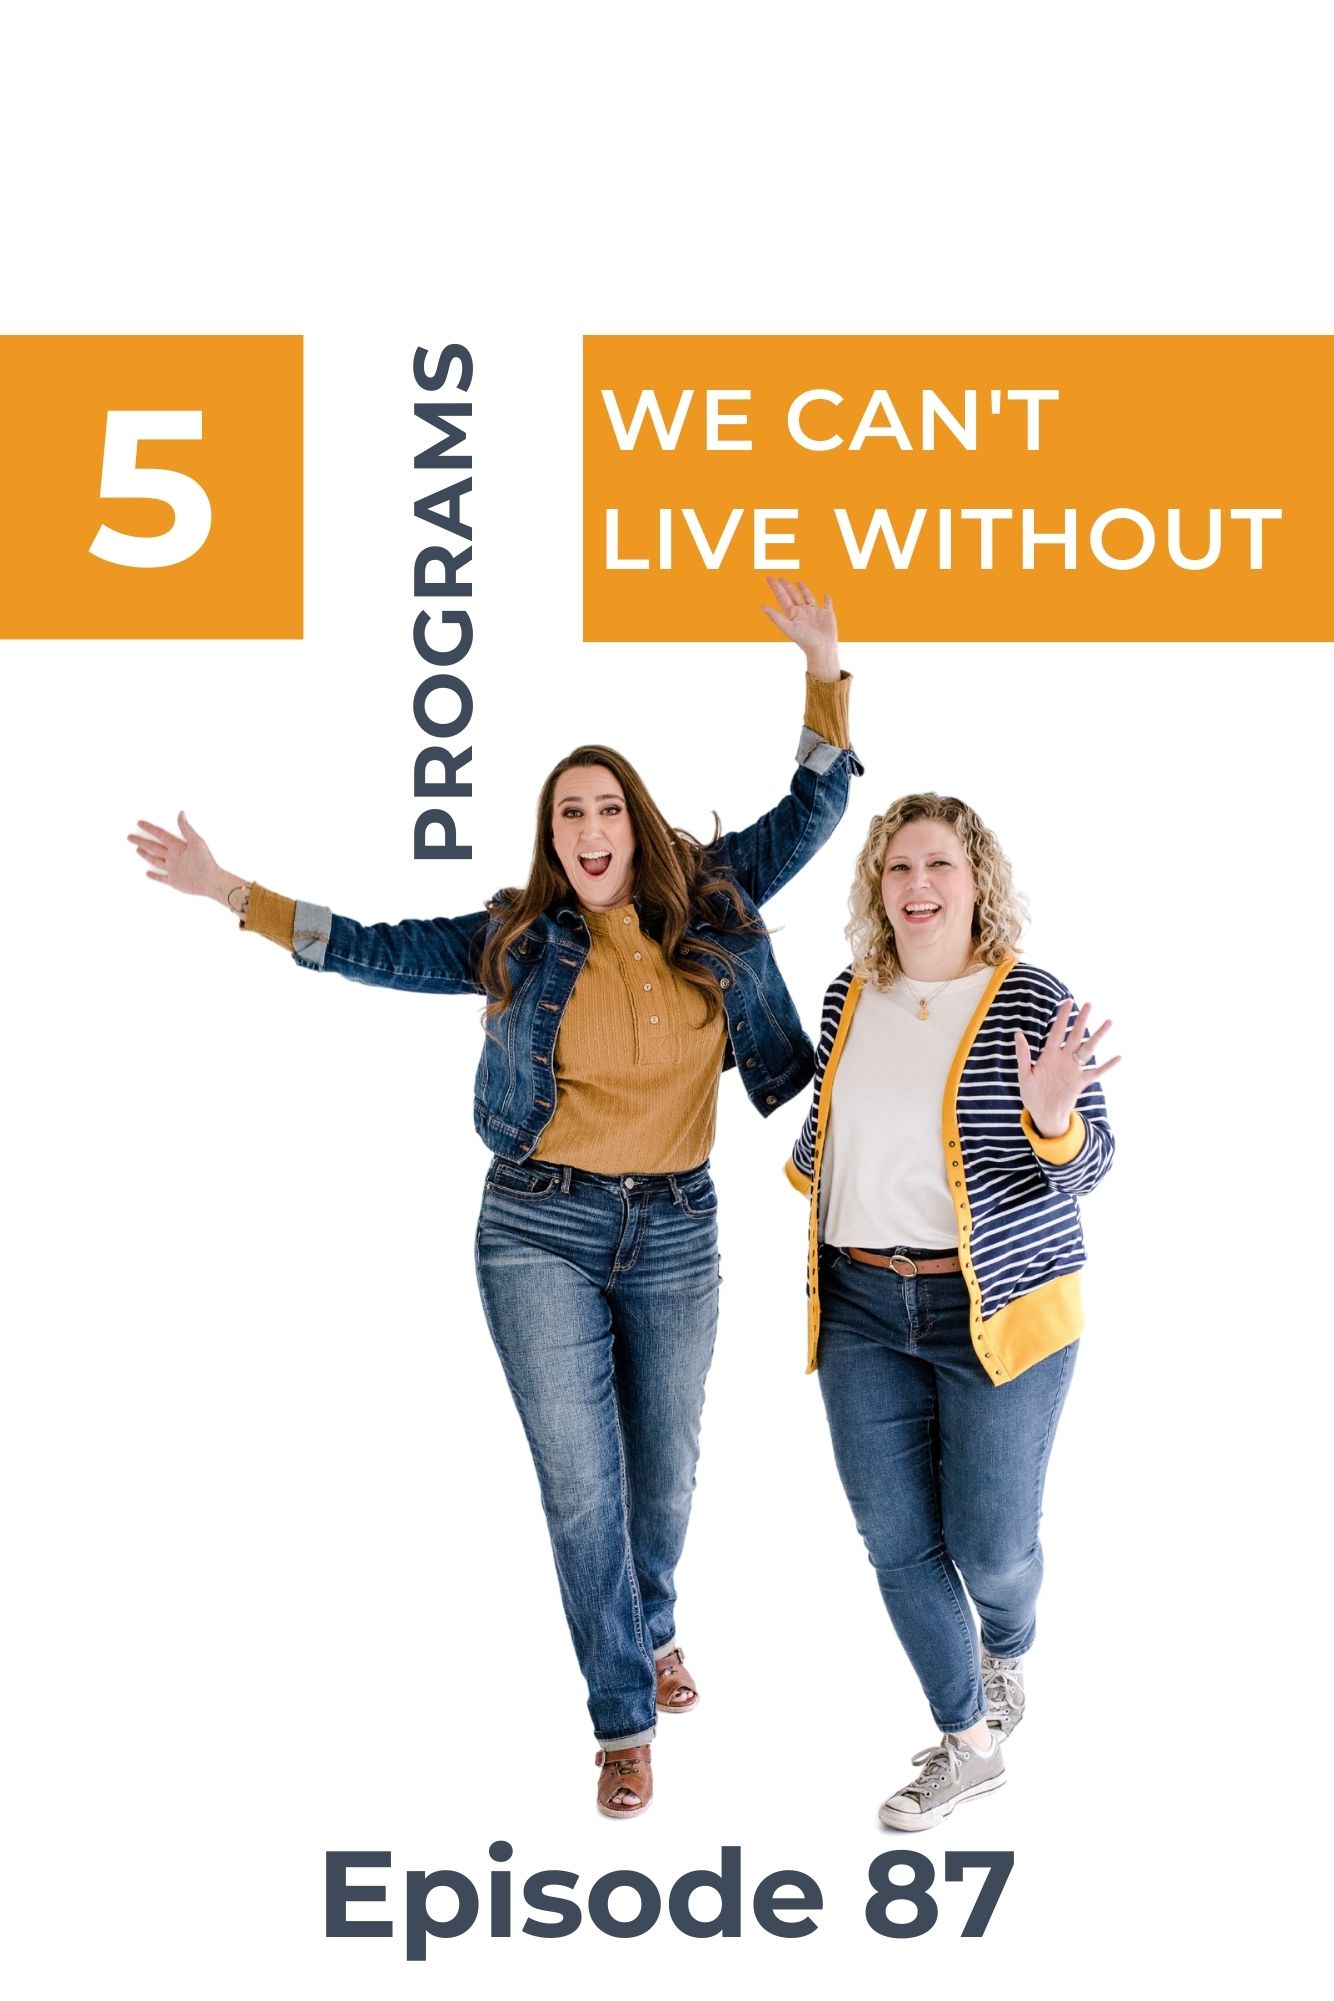 Two Christian women business owners dancing around and talking about 5 programs they can't live without in their business for their Christian business podcast for women.